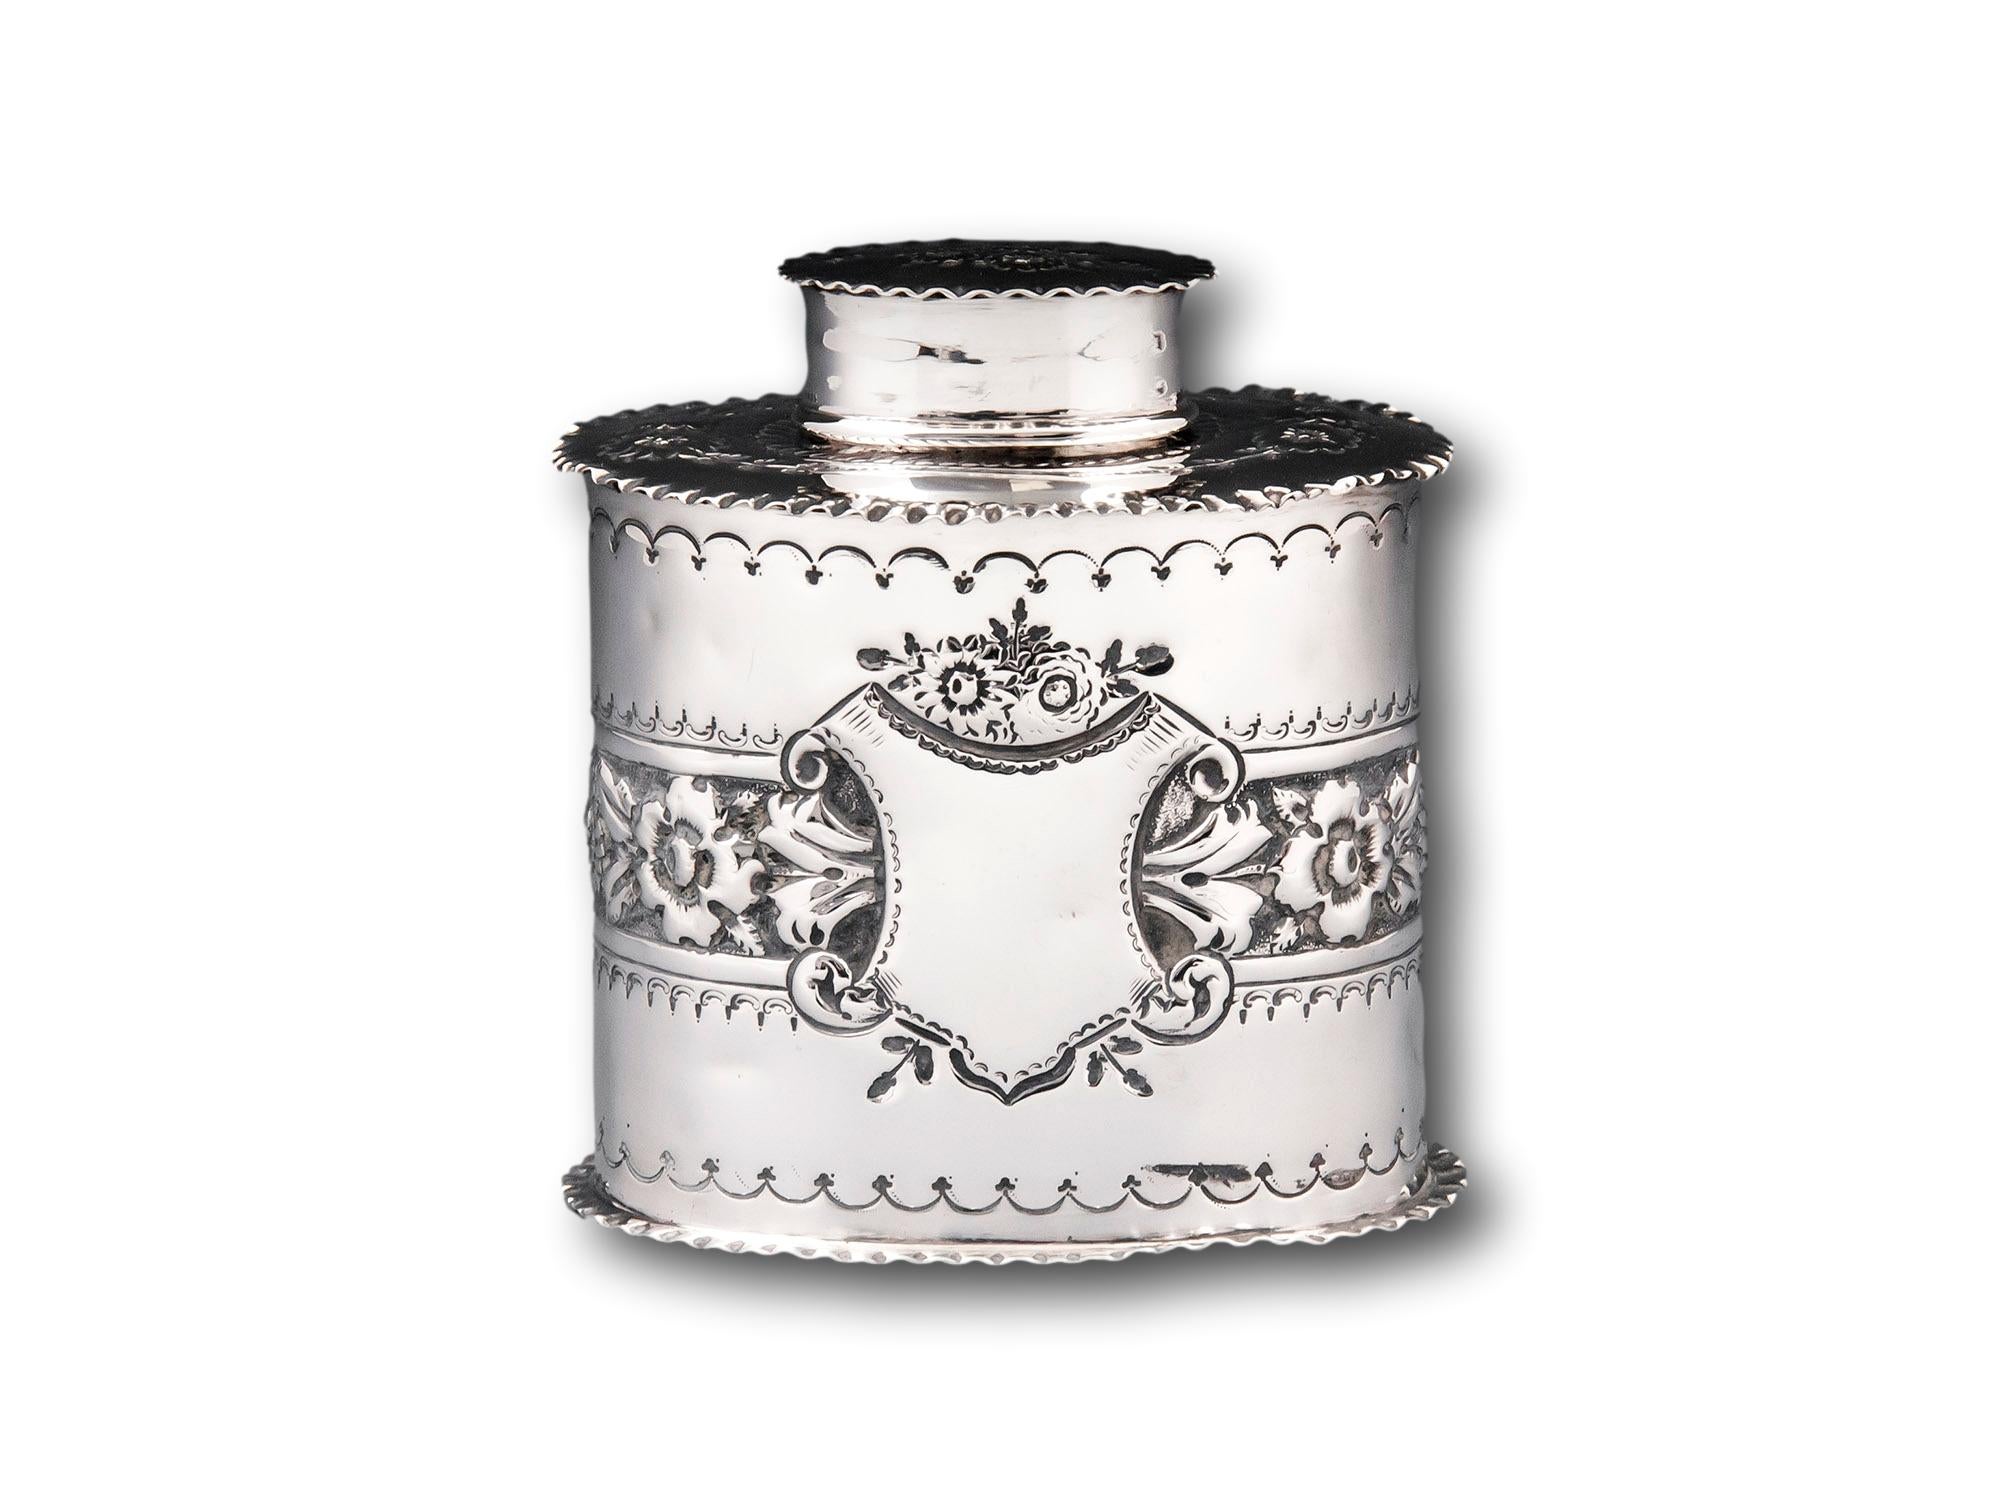 Decorate with Repousee Flowers 

From our Tea Caddy collection, we are pleased to offer this Sterling Silver Tea Caddy. The Tea Caddy of oval canister form with a central band of floral repousse decoration with two central shields on the front and